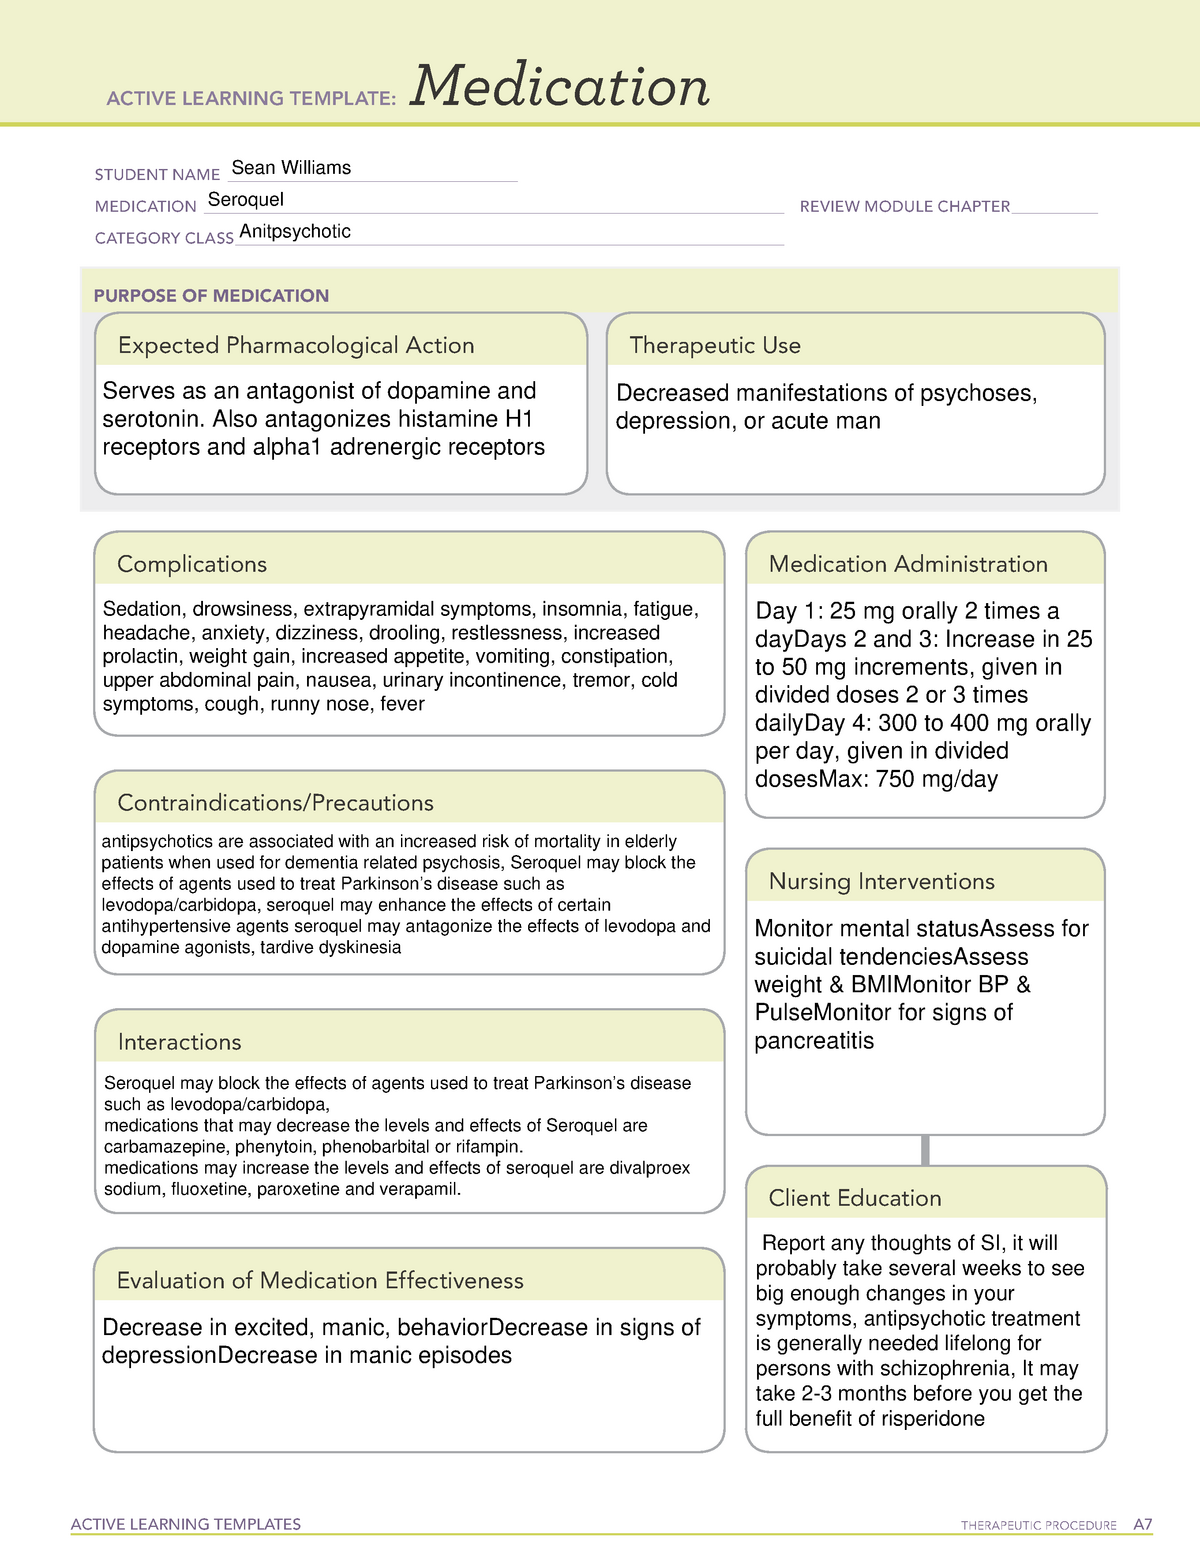 ATI Medication Template Seroquel ACTIVE LEARNING TEMPLATES